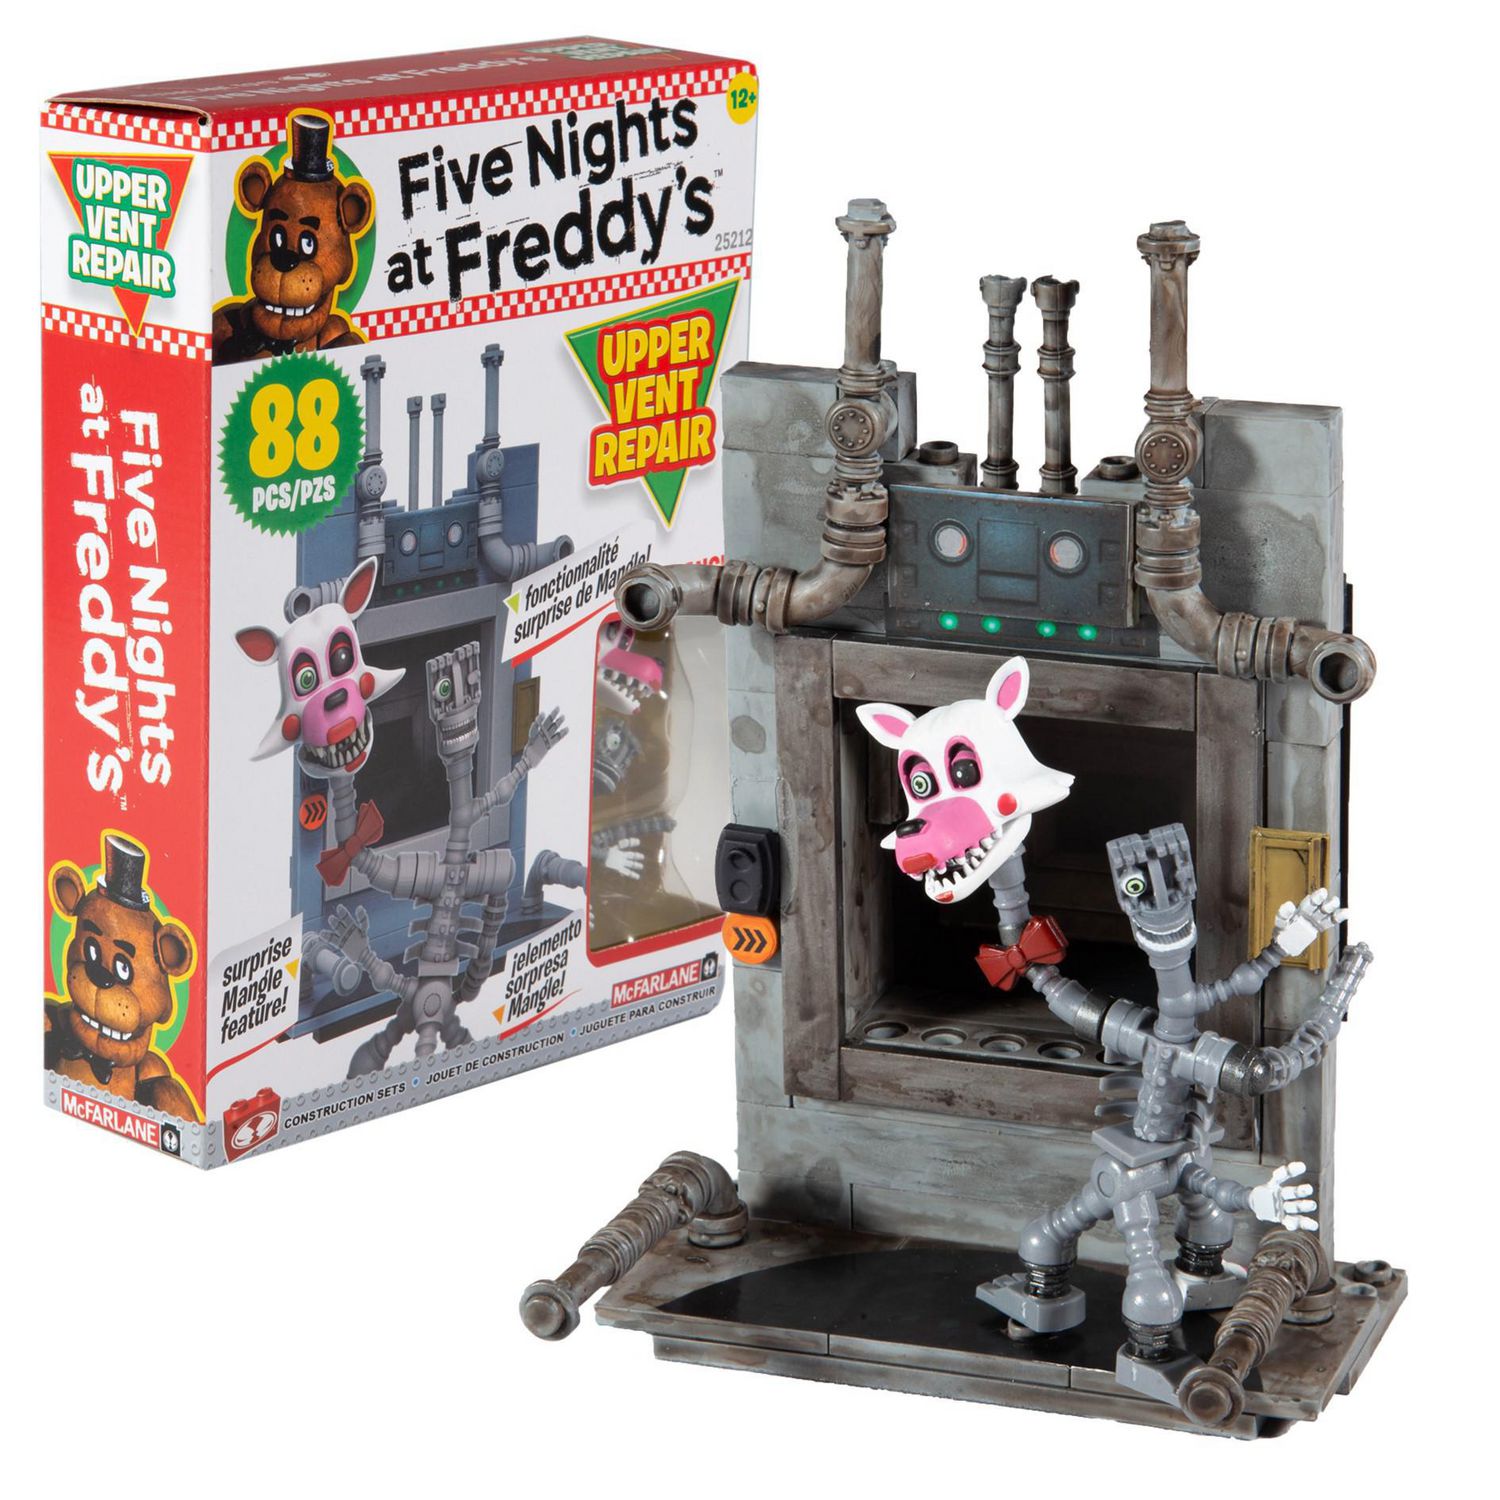 * McFarlane Toys Five Nights at Freddy's Upper Vent Repair Mangle 88pcs for sale online 